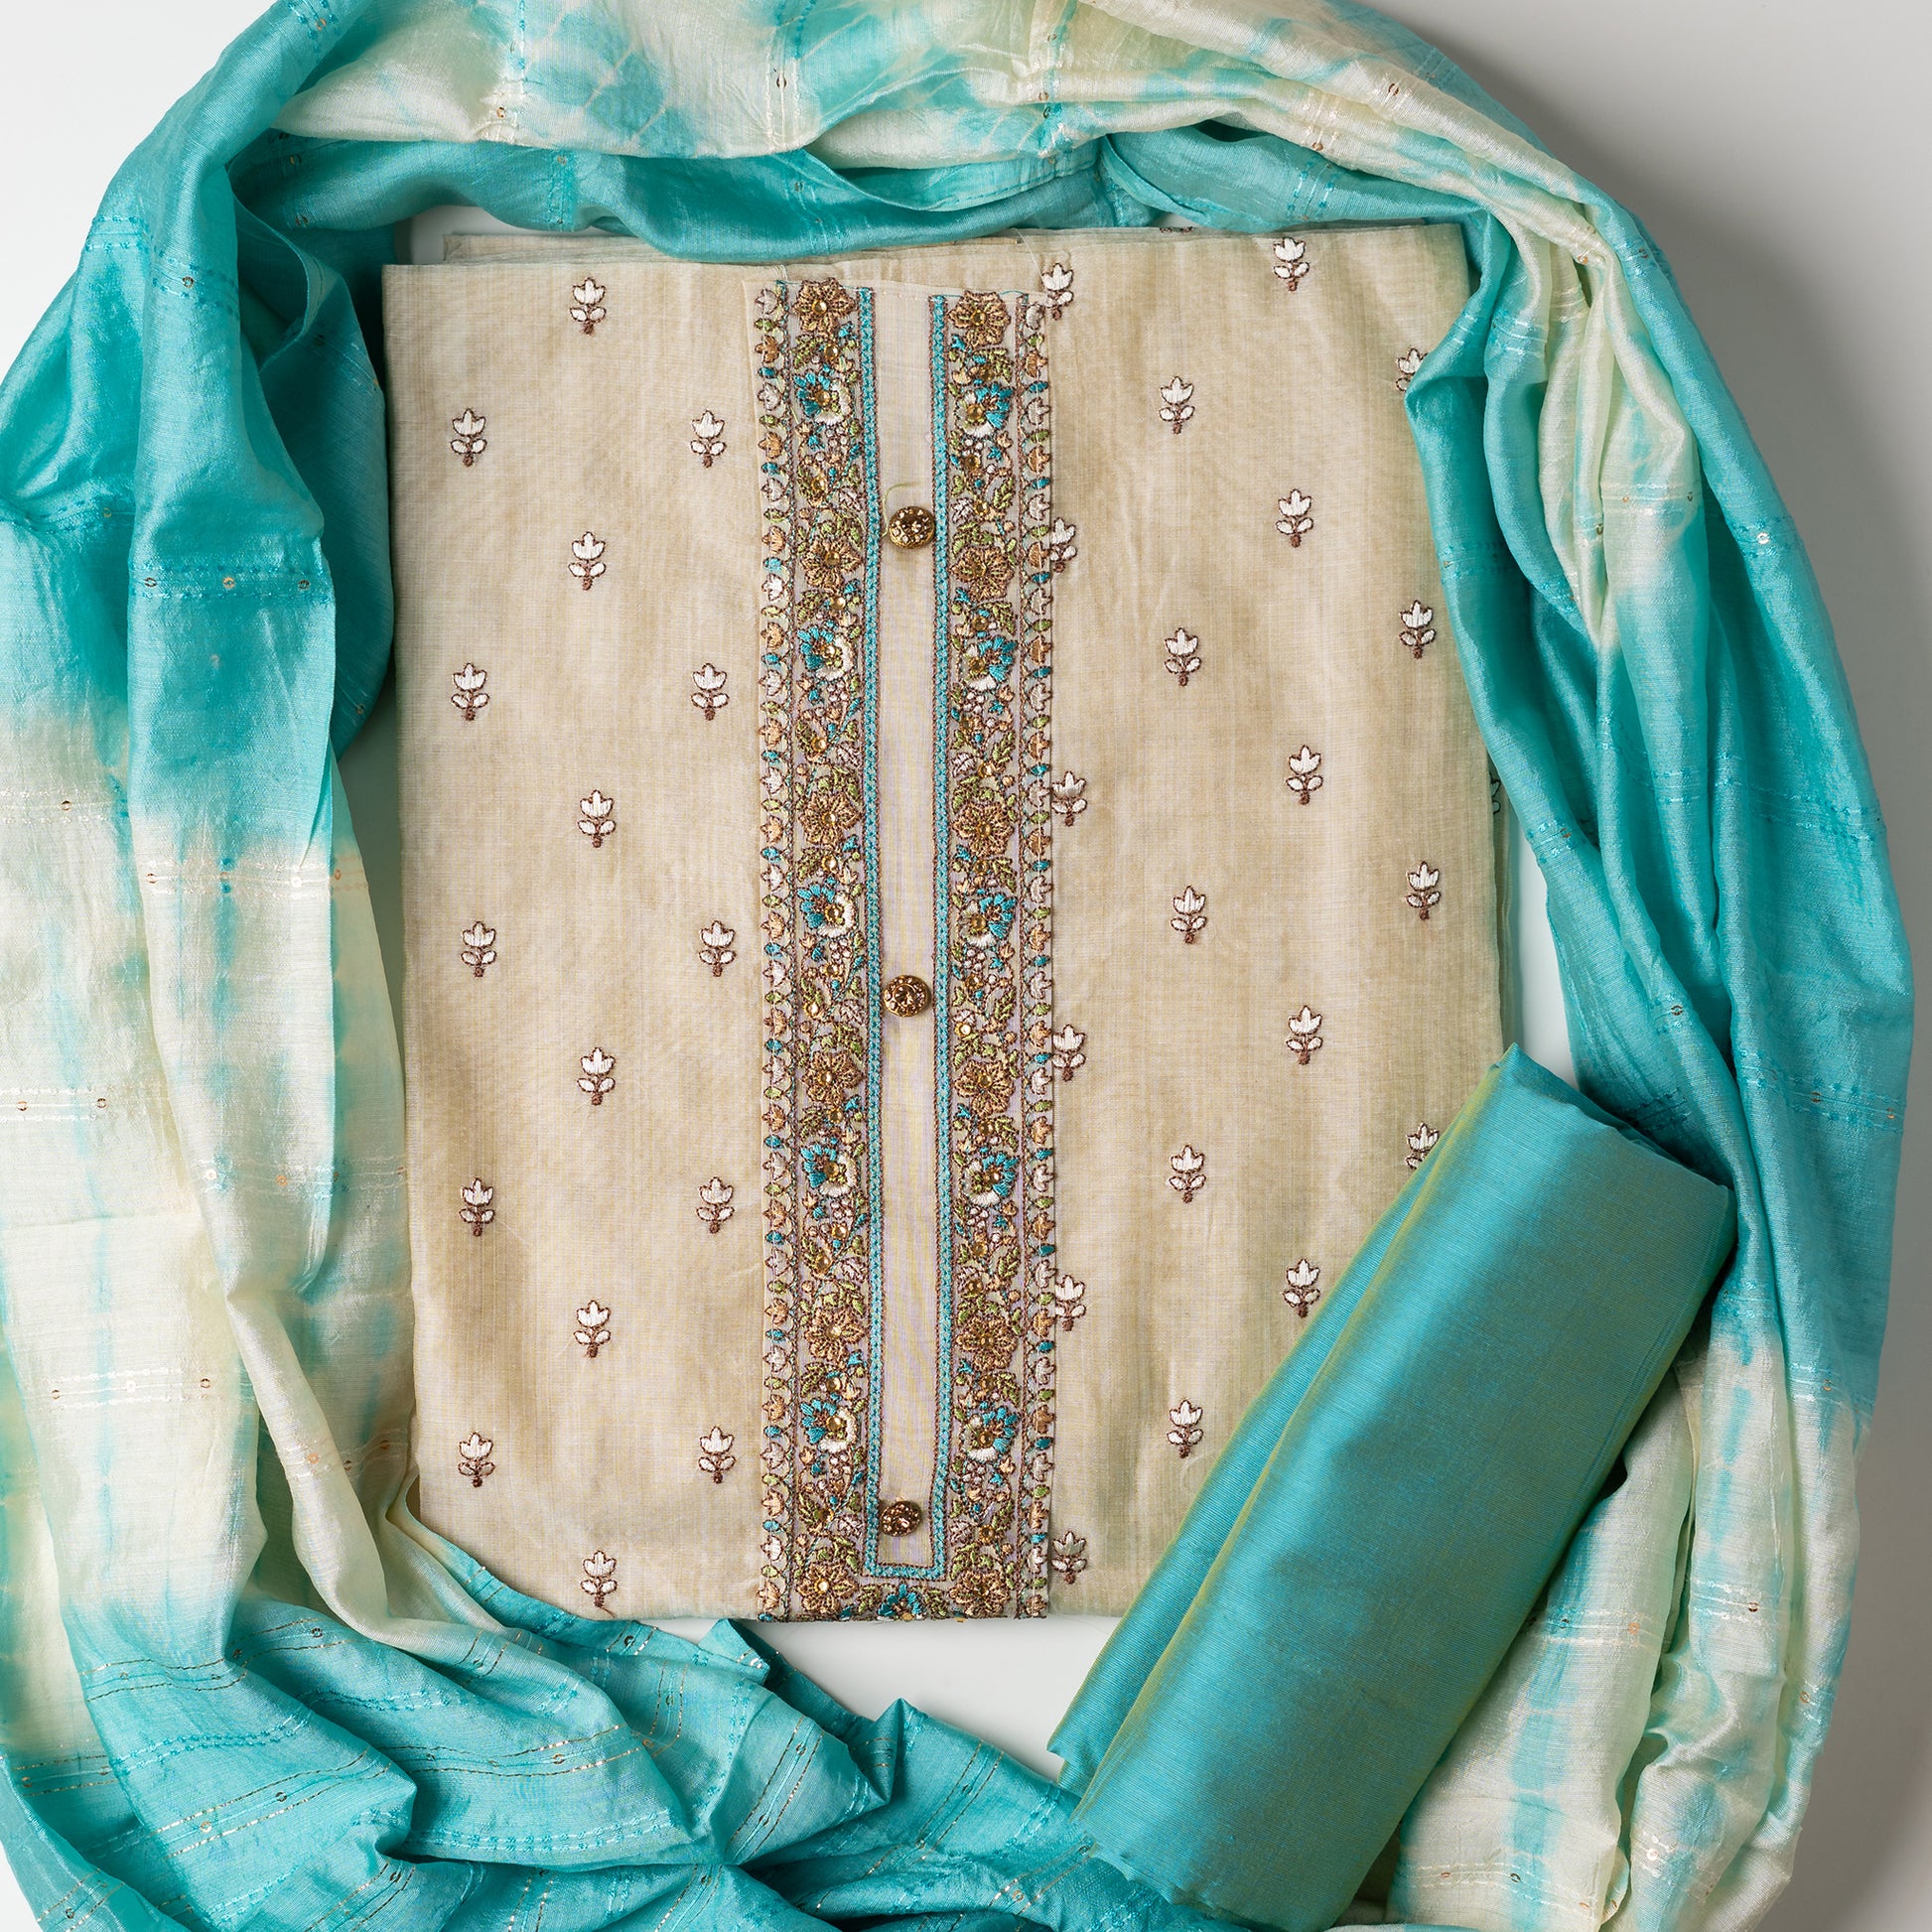 churidhar material set, Ivory color Chanderi Silk top with floral embroidery all over the body in the front and elegant sea green color embroidery work in neck line with show buttons. cotton sea green color plain bottom. Sea green and cream color silk dupatta with sequins and thread work 